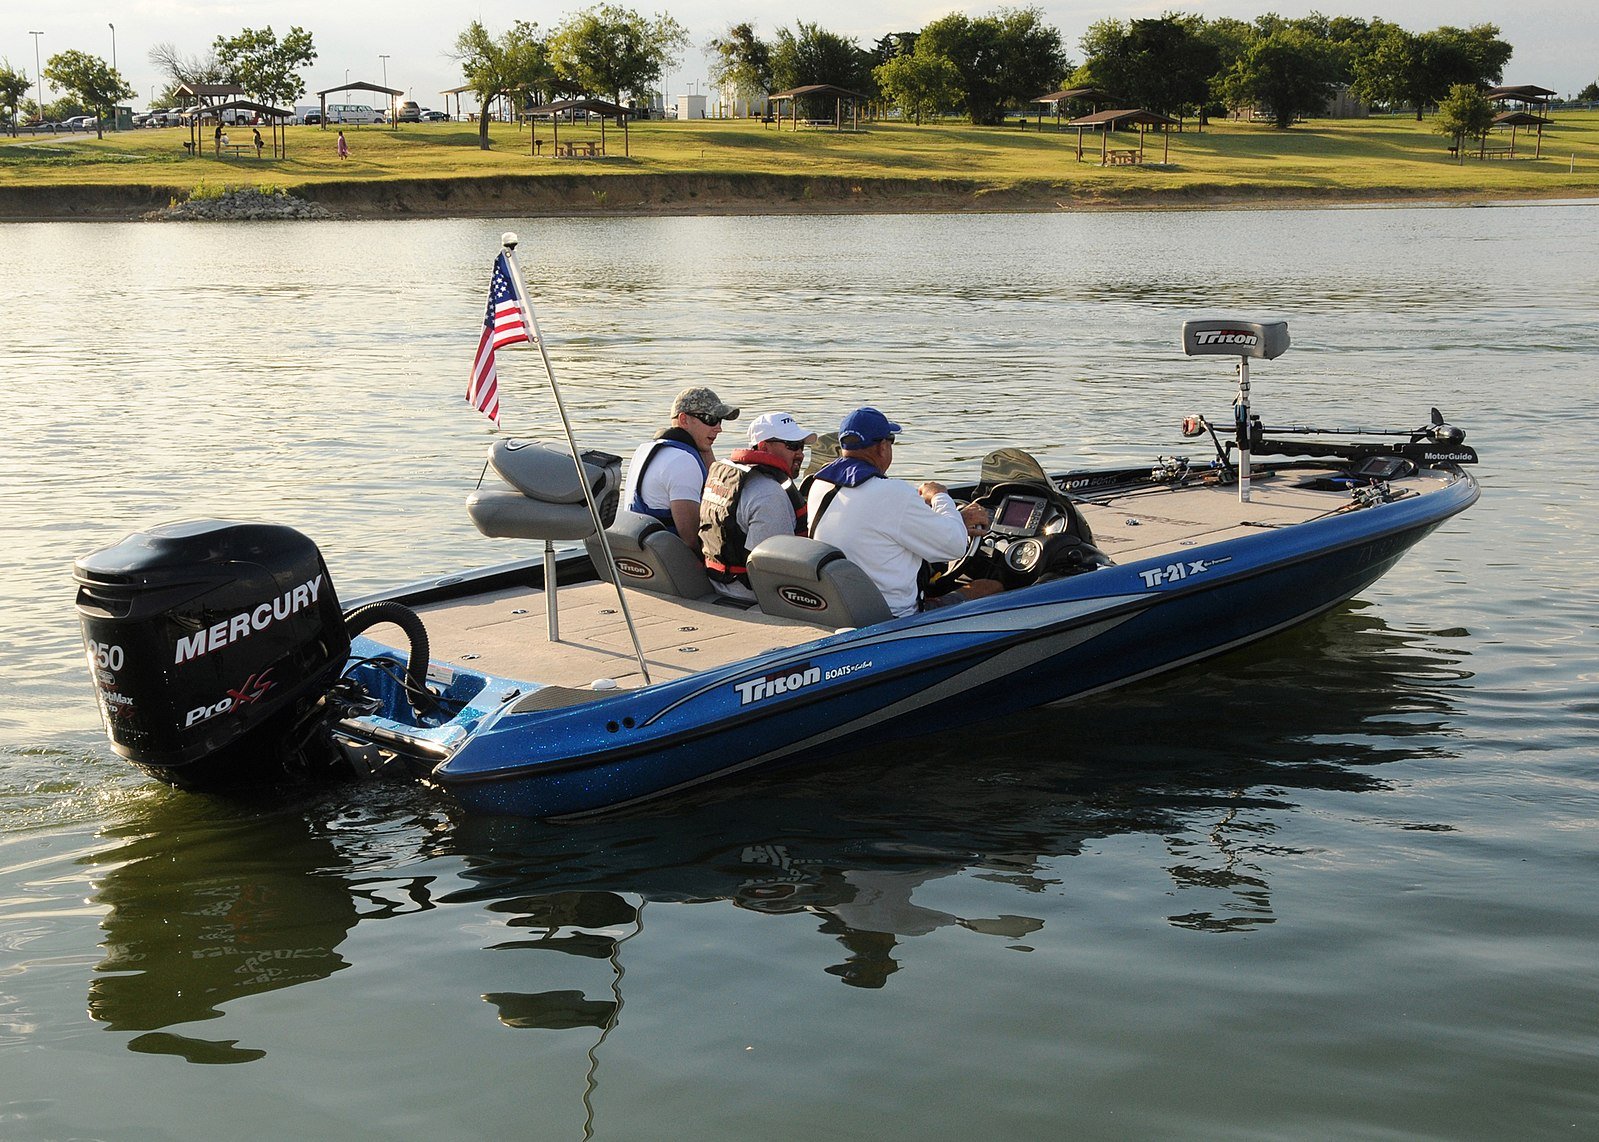 The 2009 Wounded Warriors Tournament of Heroes was held on Lewisville Lake